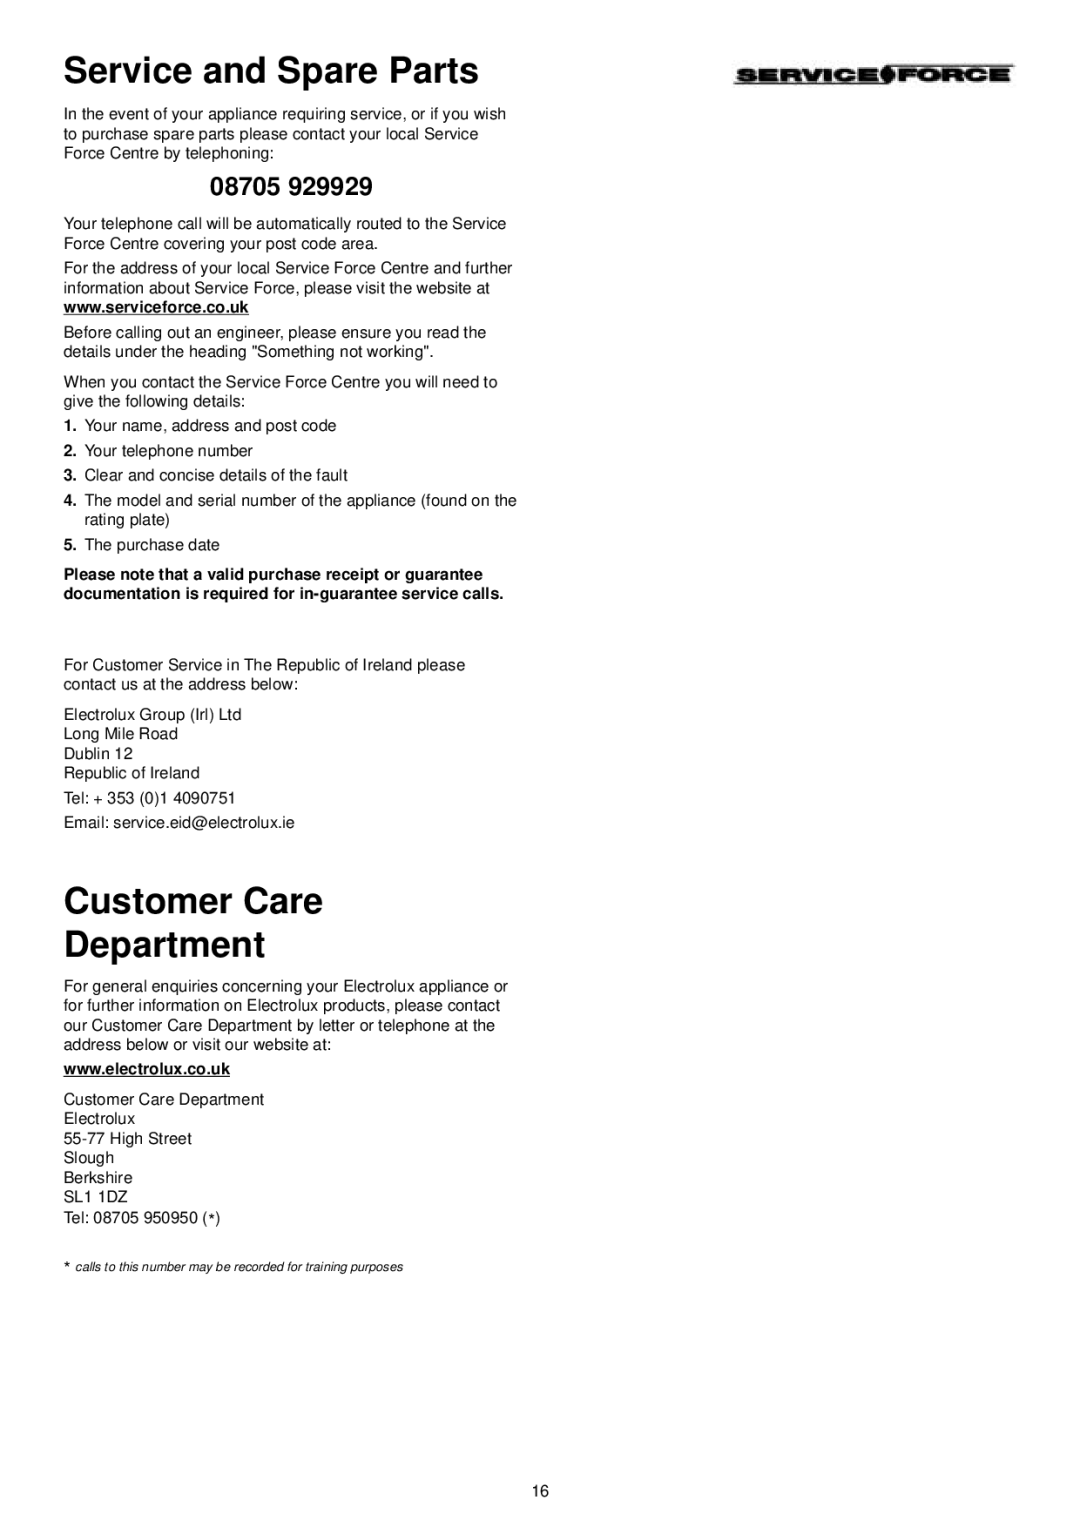 Electrolux ESL 4115 manual Service and Spare Parts, Customer Care Department 